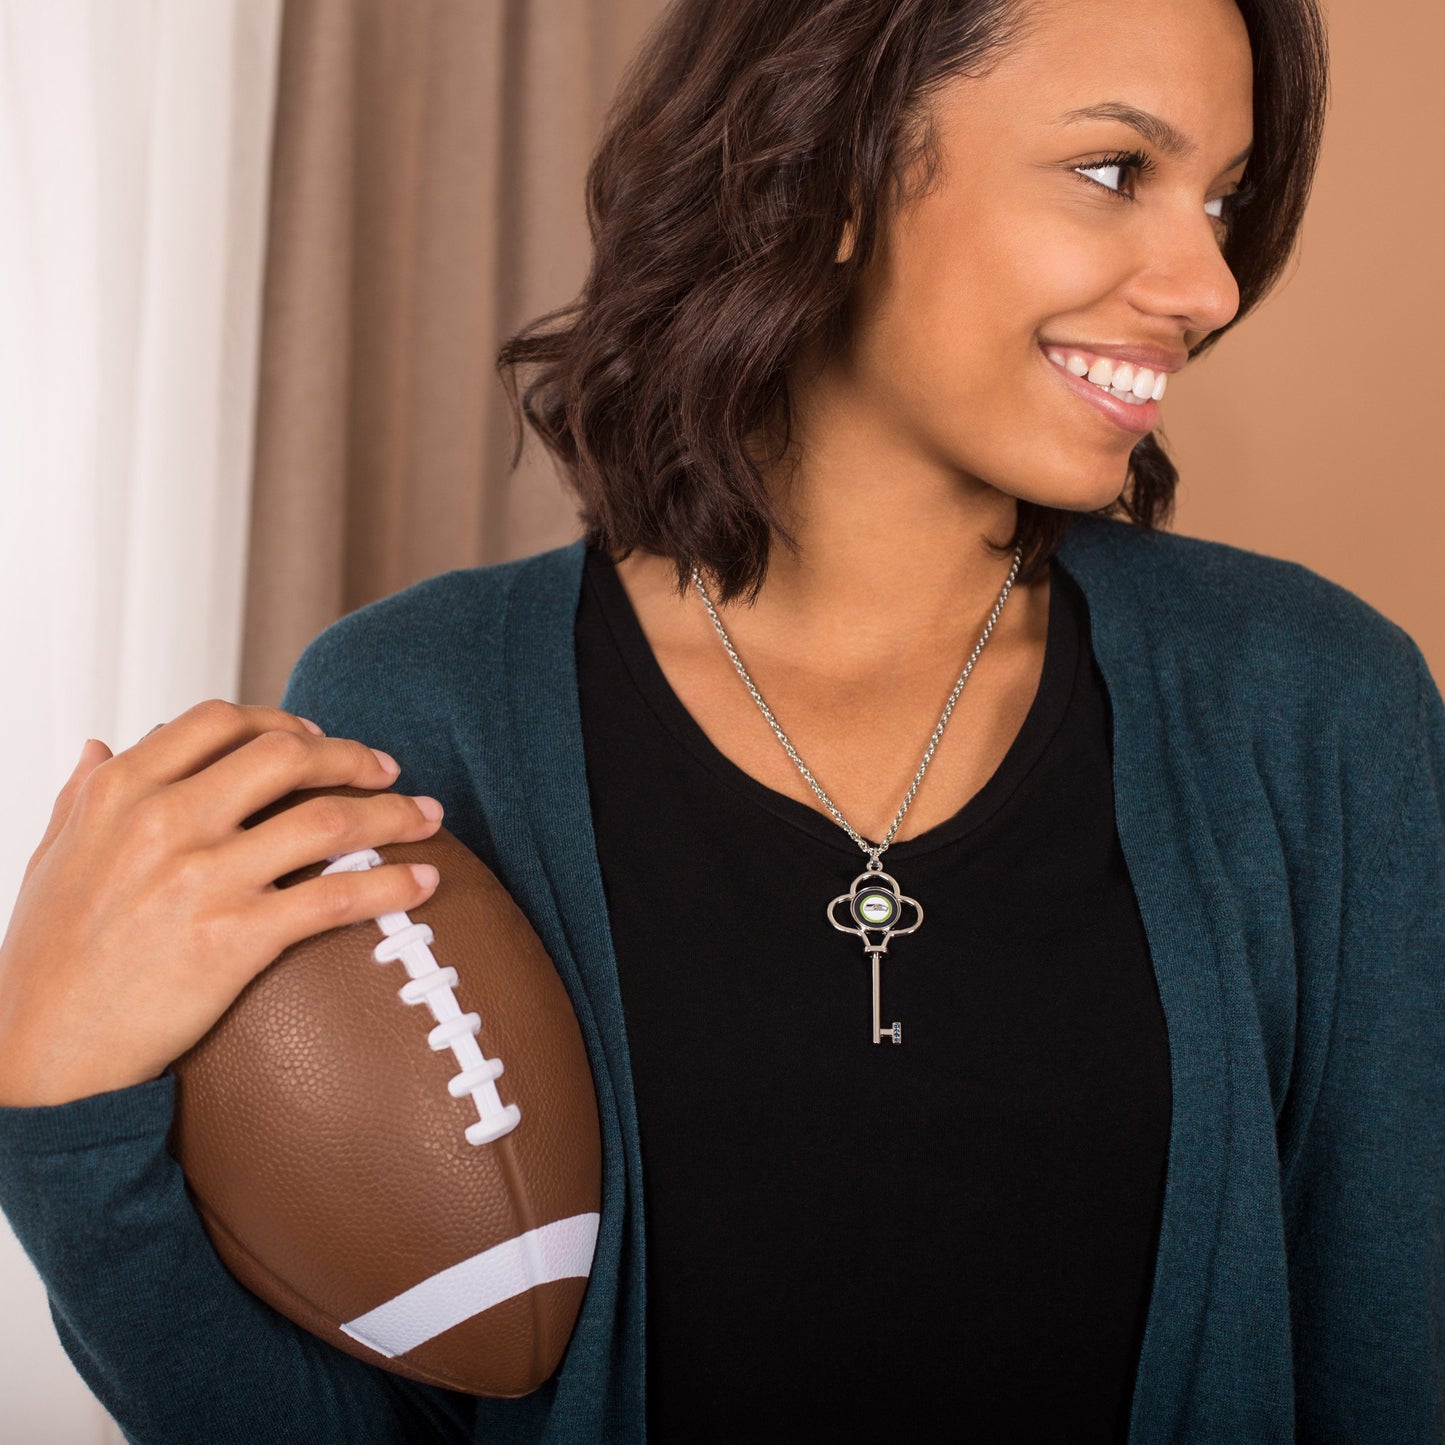 Officially Licensed NFL Stainless Steel Necklace